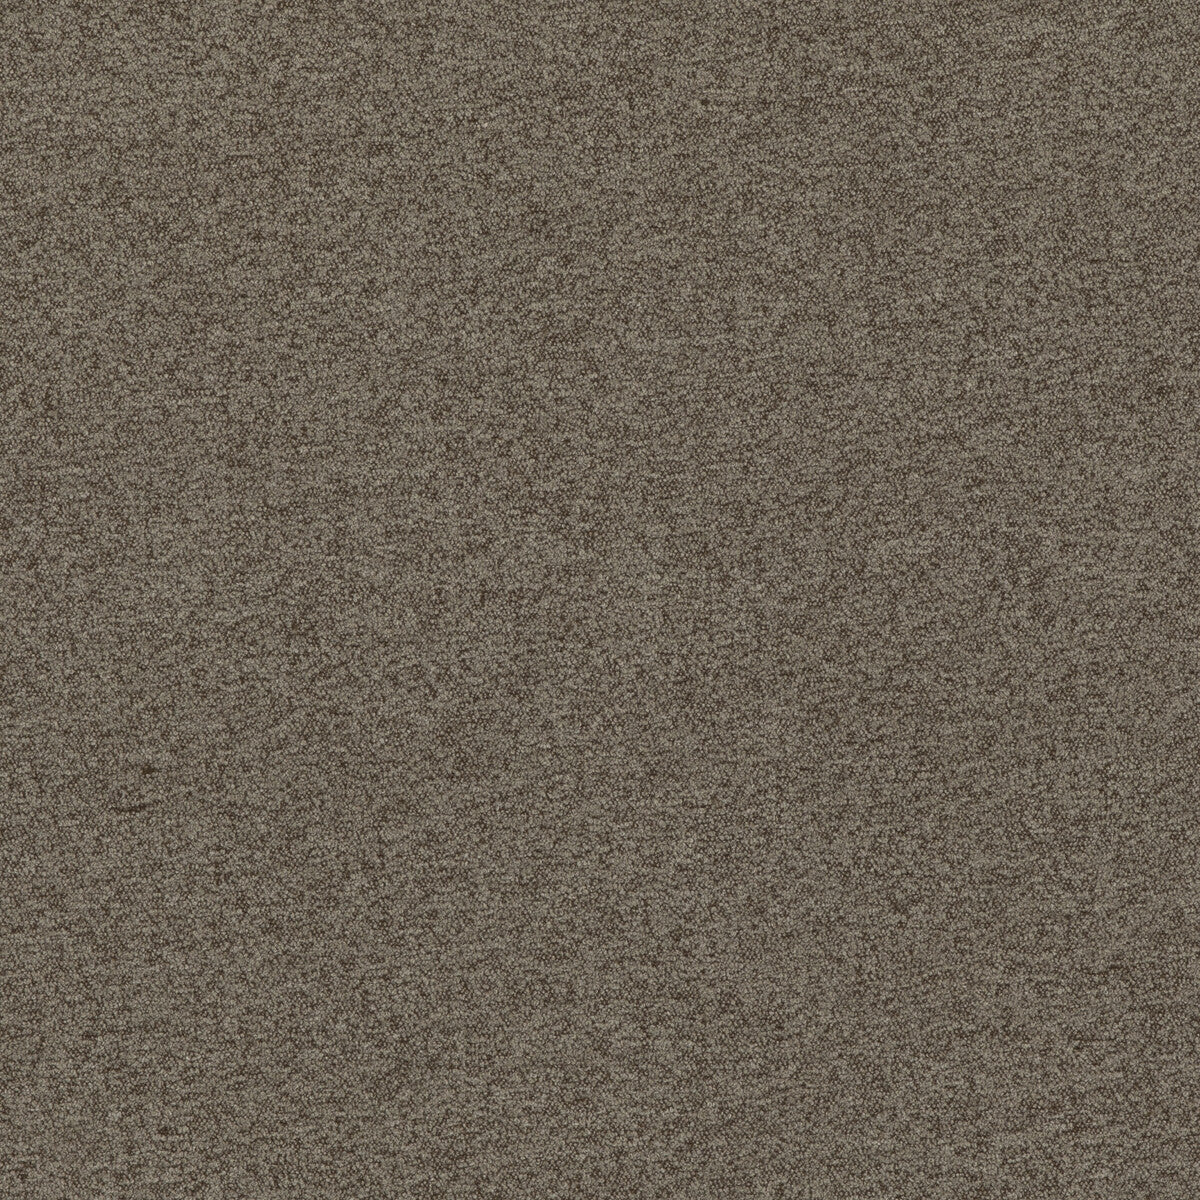 Baker House Boucle fabric in taupe color - pattern BF10965.210.0 - by G P &amp; J Baker in the Baker House Boucle collection